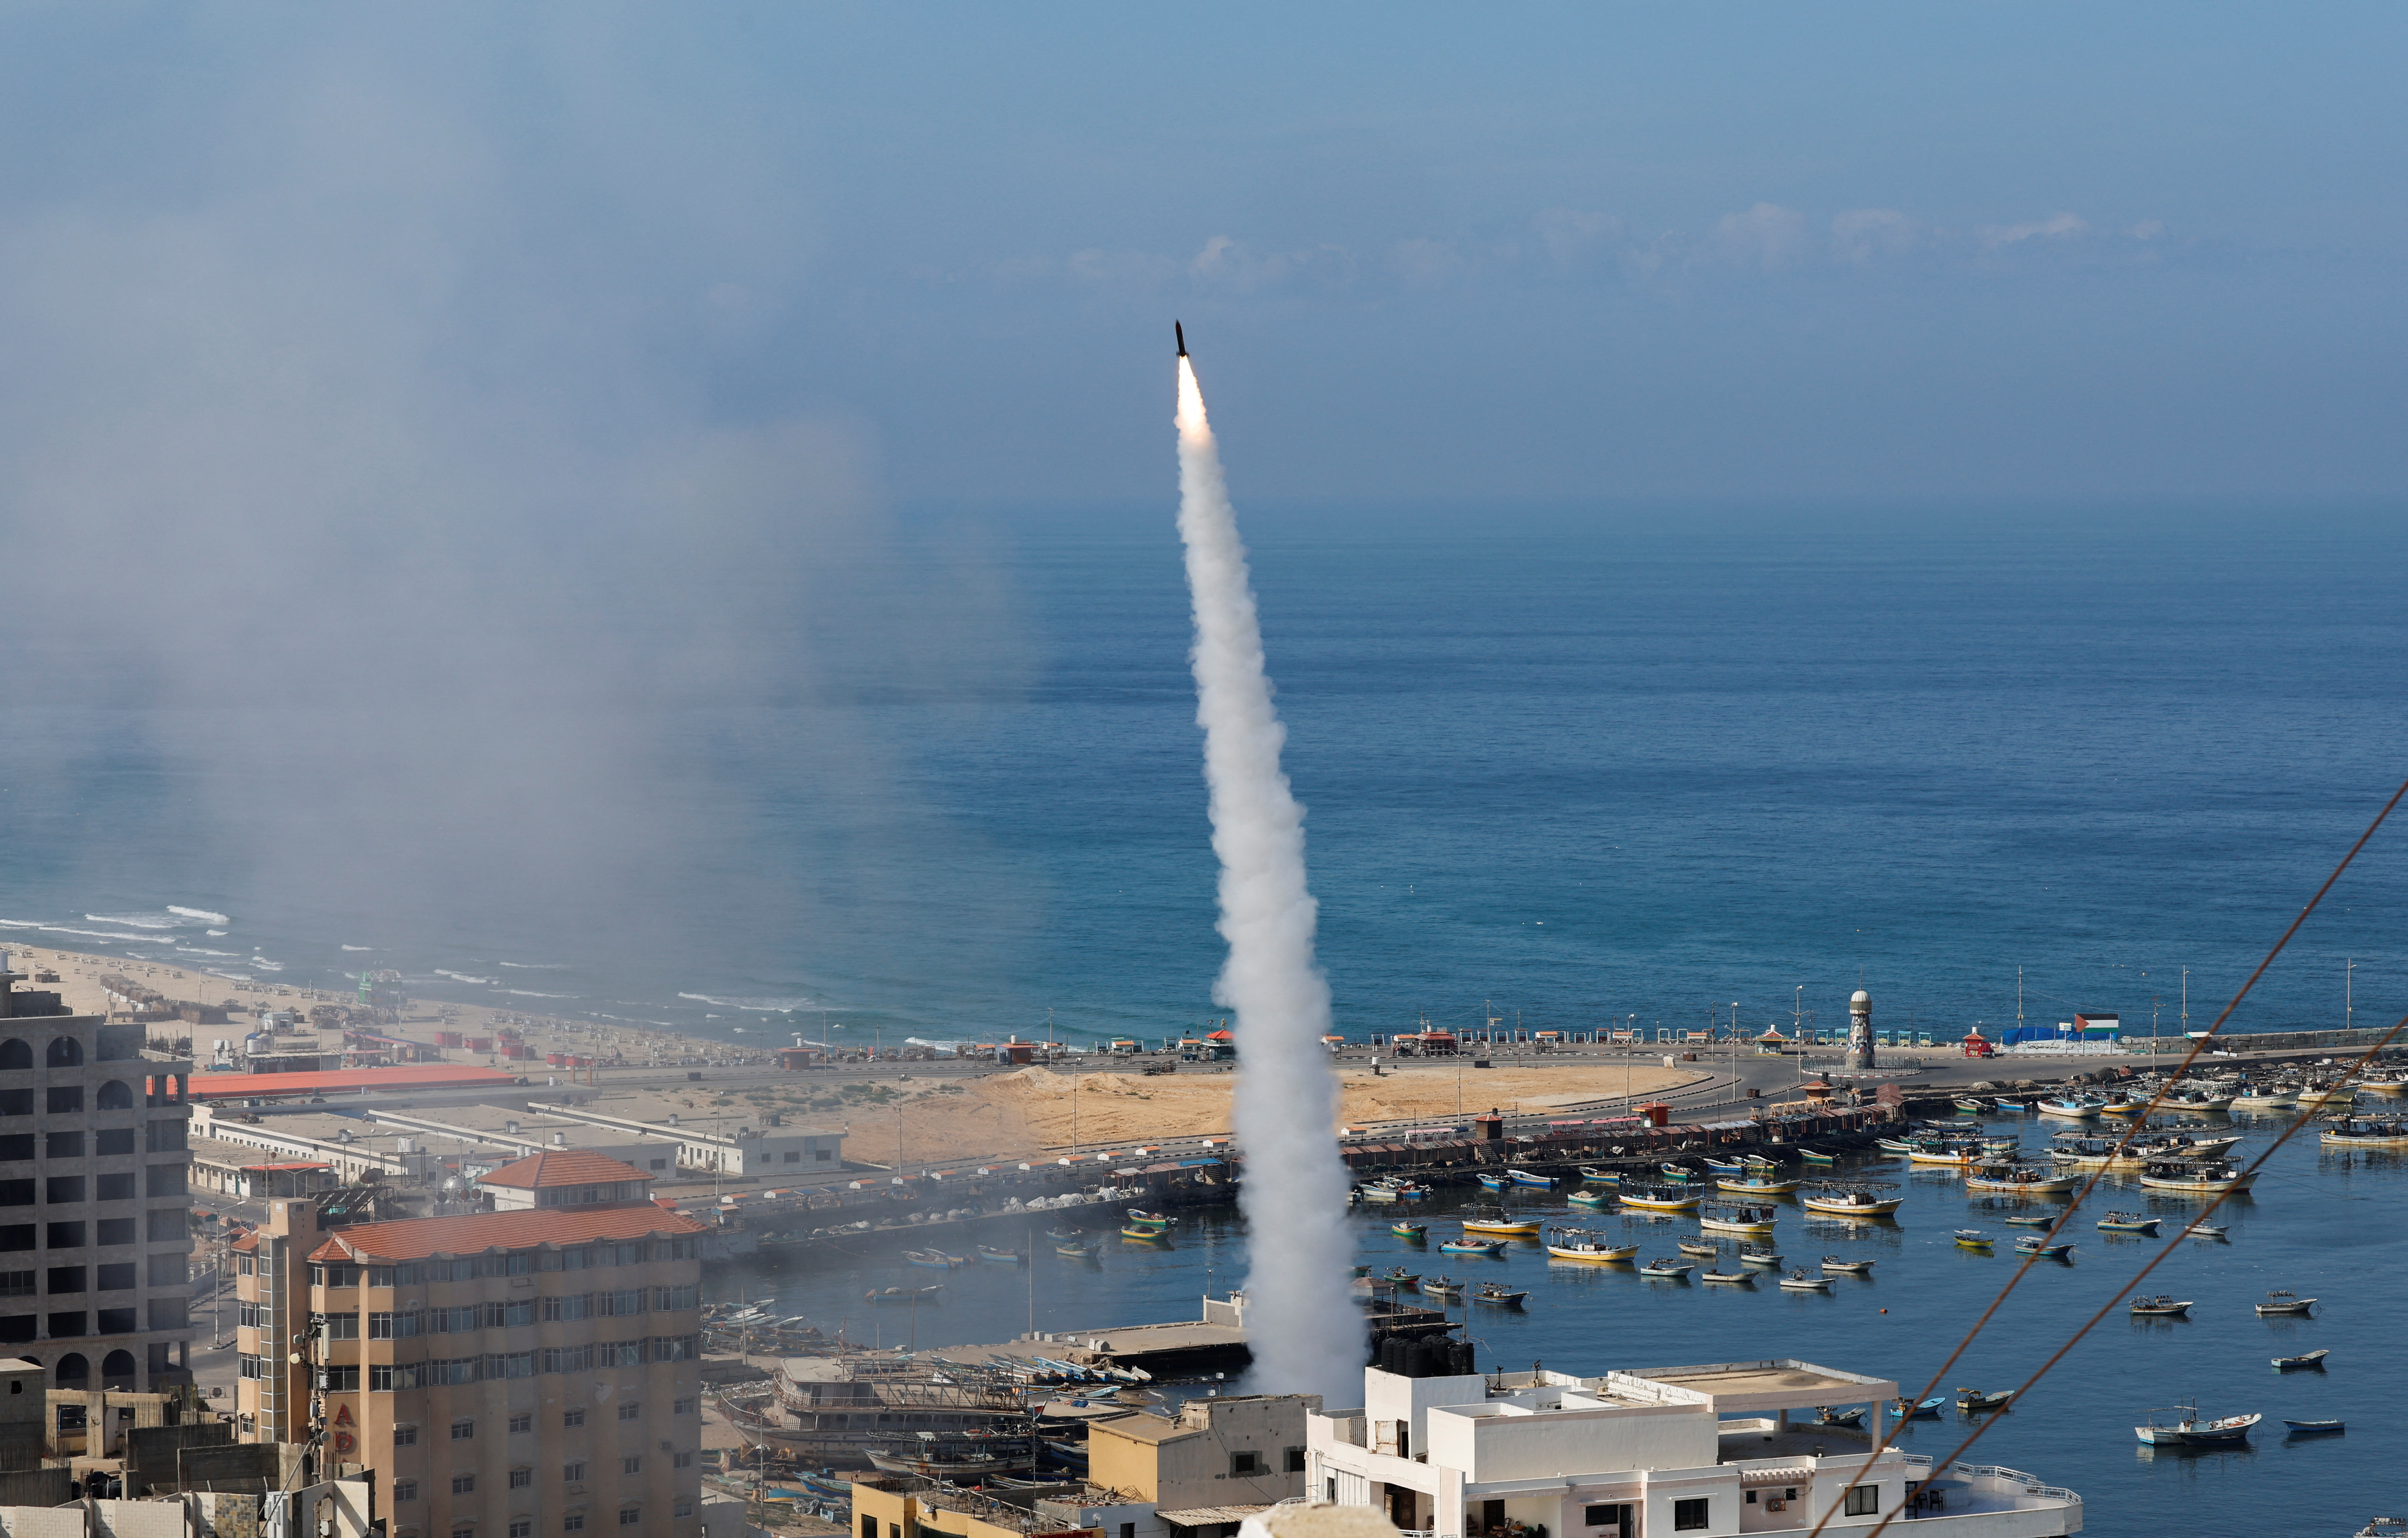 Thousands of rockets were fired by Palestinian militants into Israel early Saturday morning